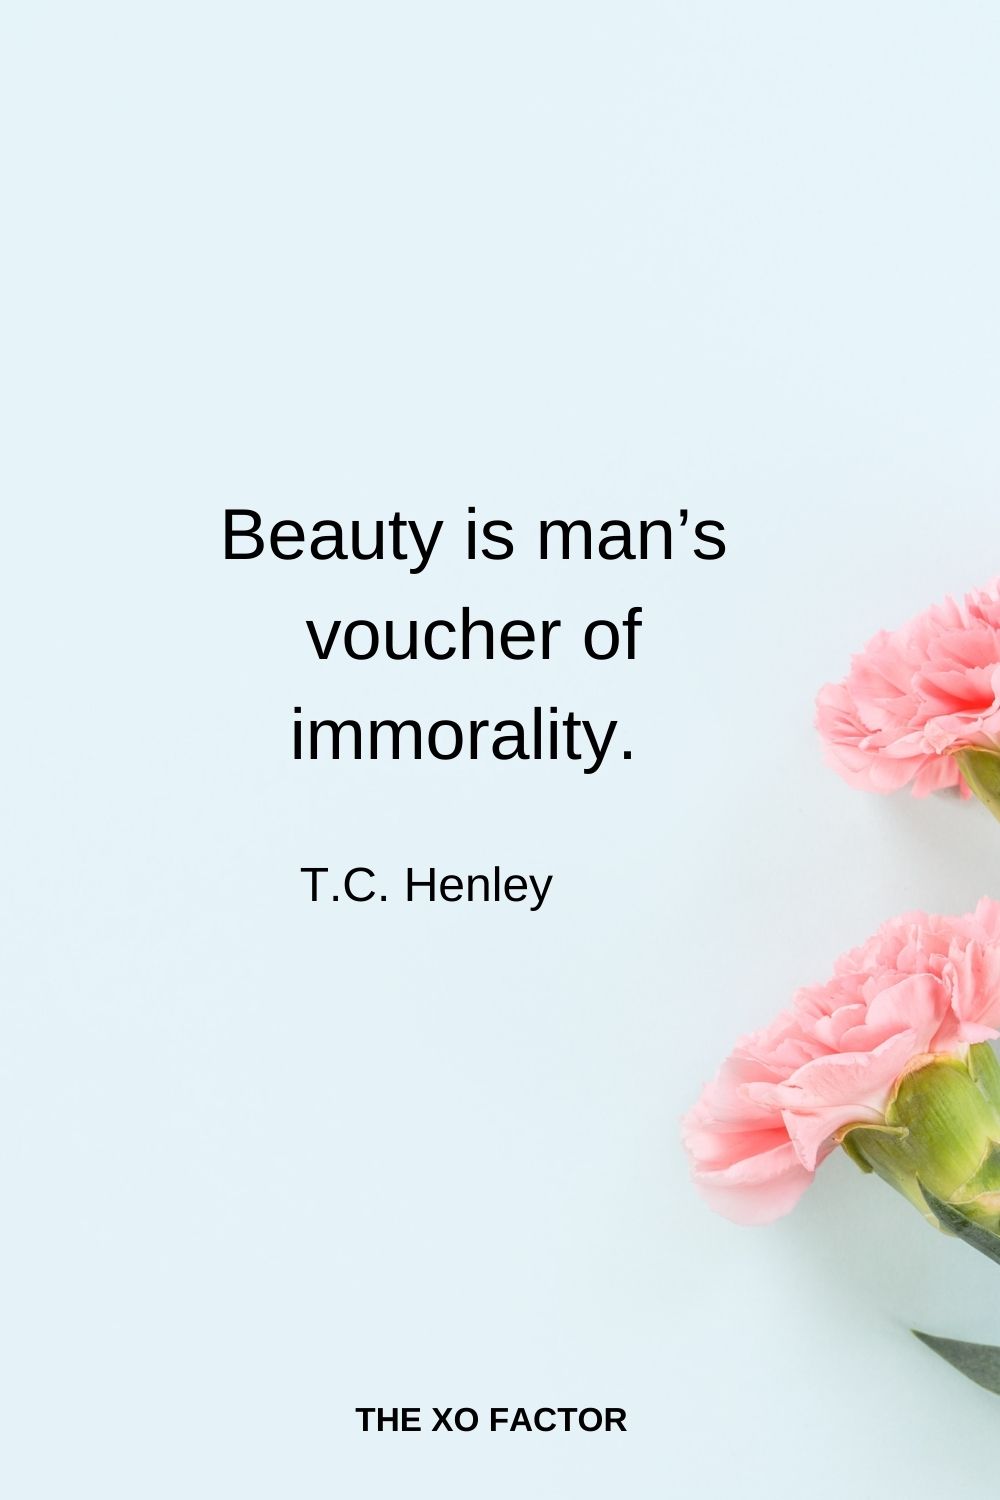 Beauty is man’s voucher of immorality.  T.C. Henley